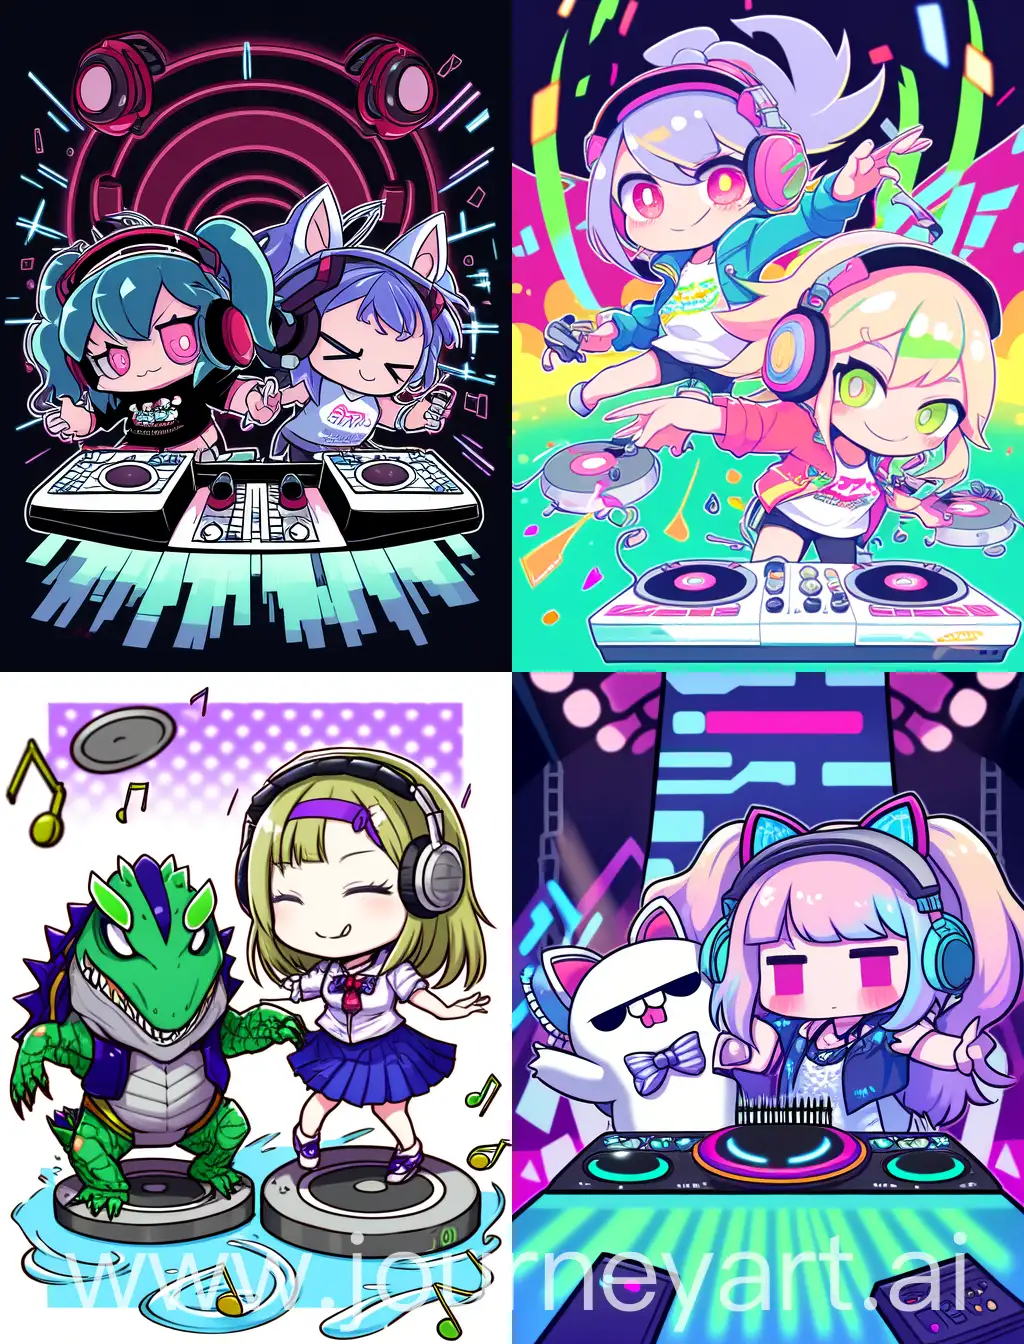 chibi aligator and anime girl playing dj, with abstract background, 